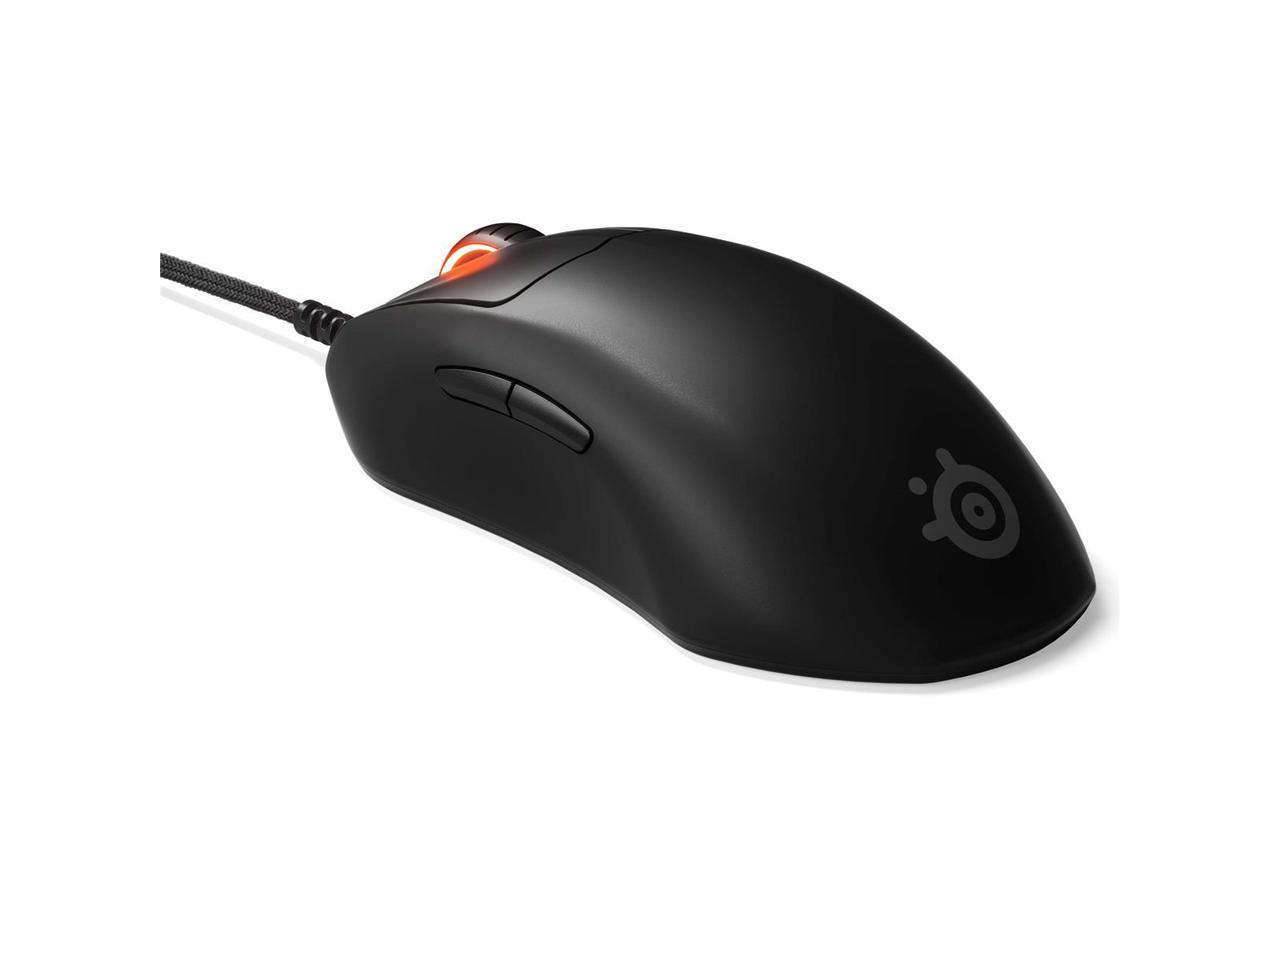 STEELSERIES PRIME+ MOUSE